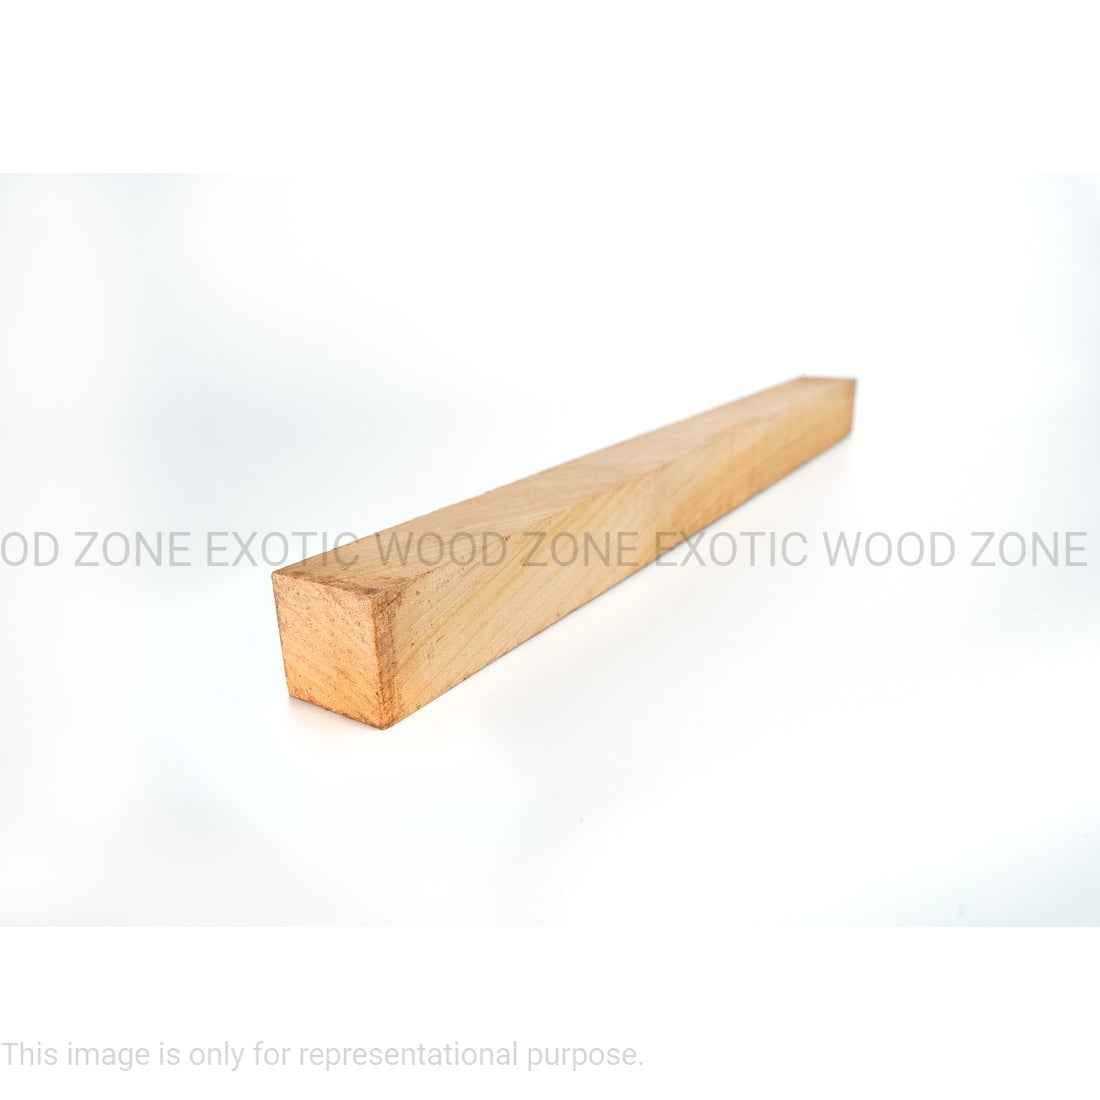 Cherry Hobby Wood/ Turning Wood Blanks 1 x 1 x 12 inches - Exotic Wood Zone - Buy online Across USA 